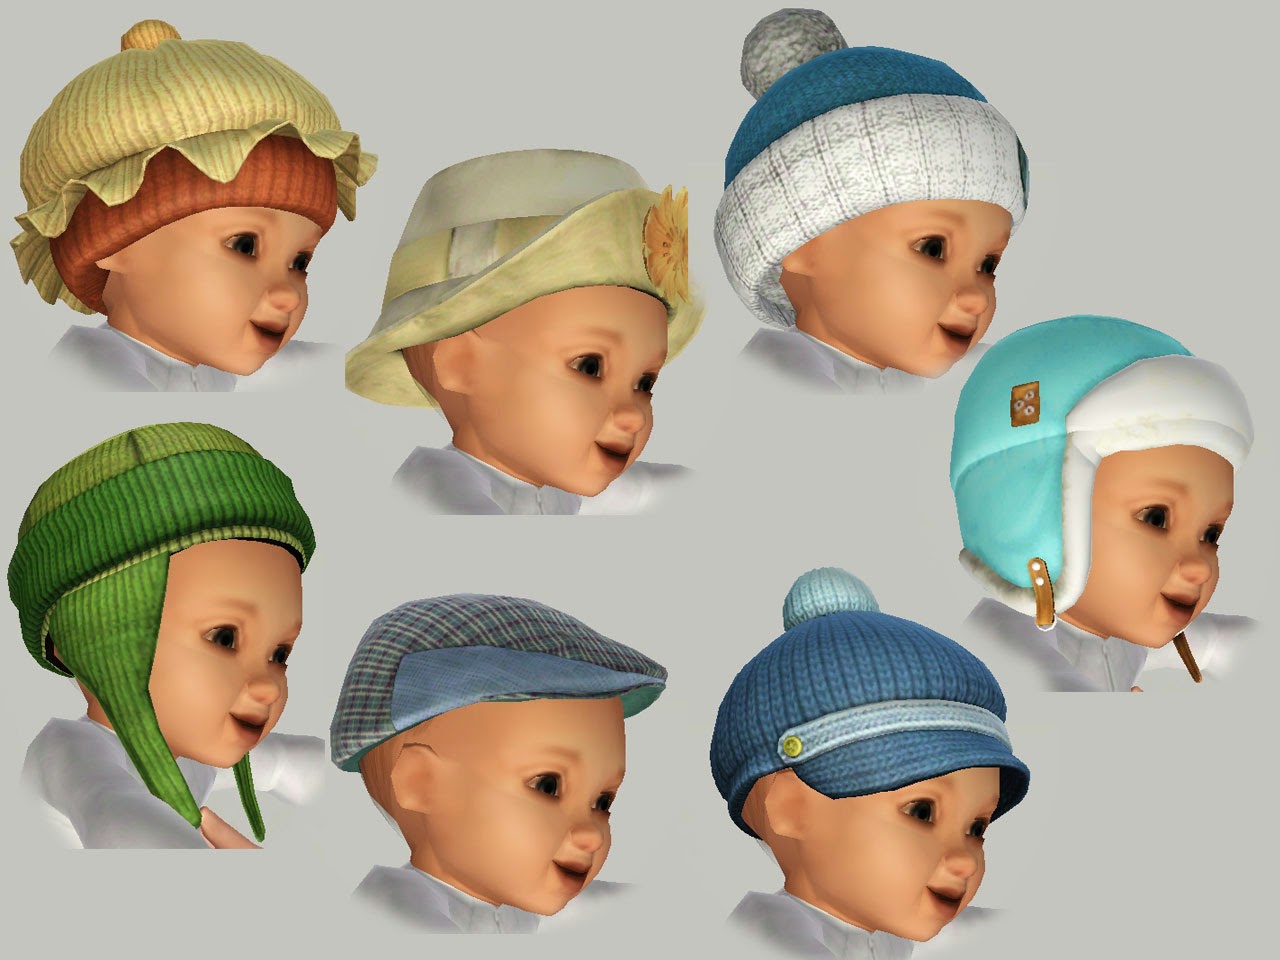 sims 3 baby mod download